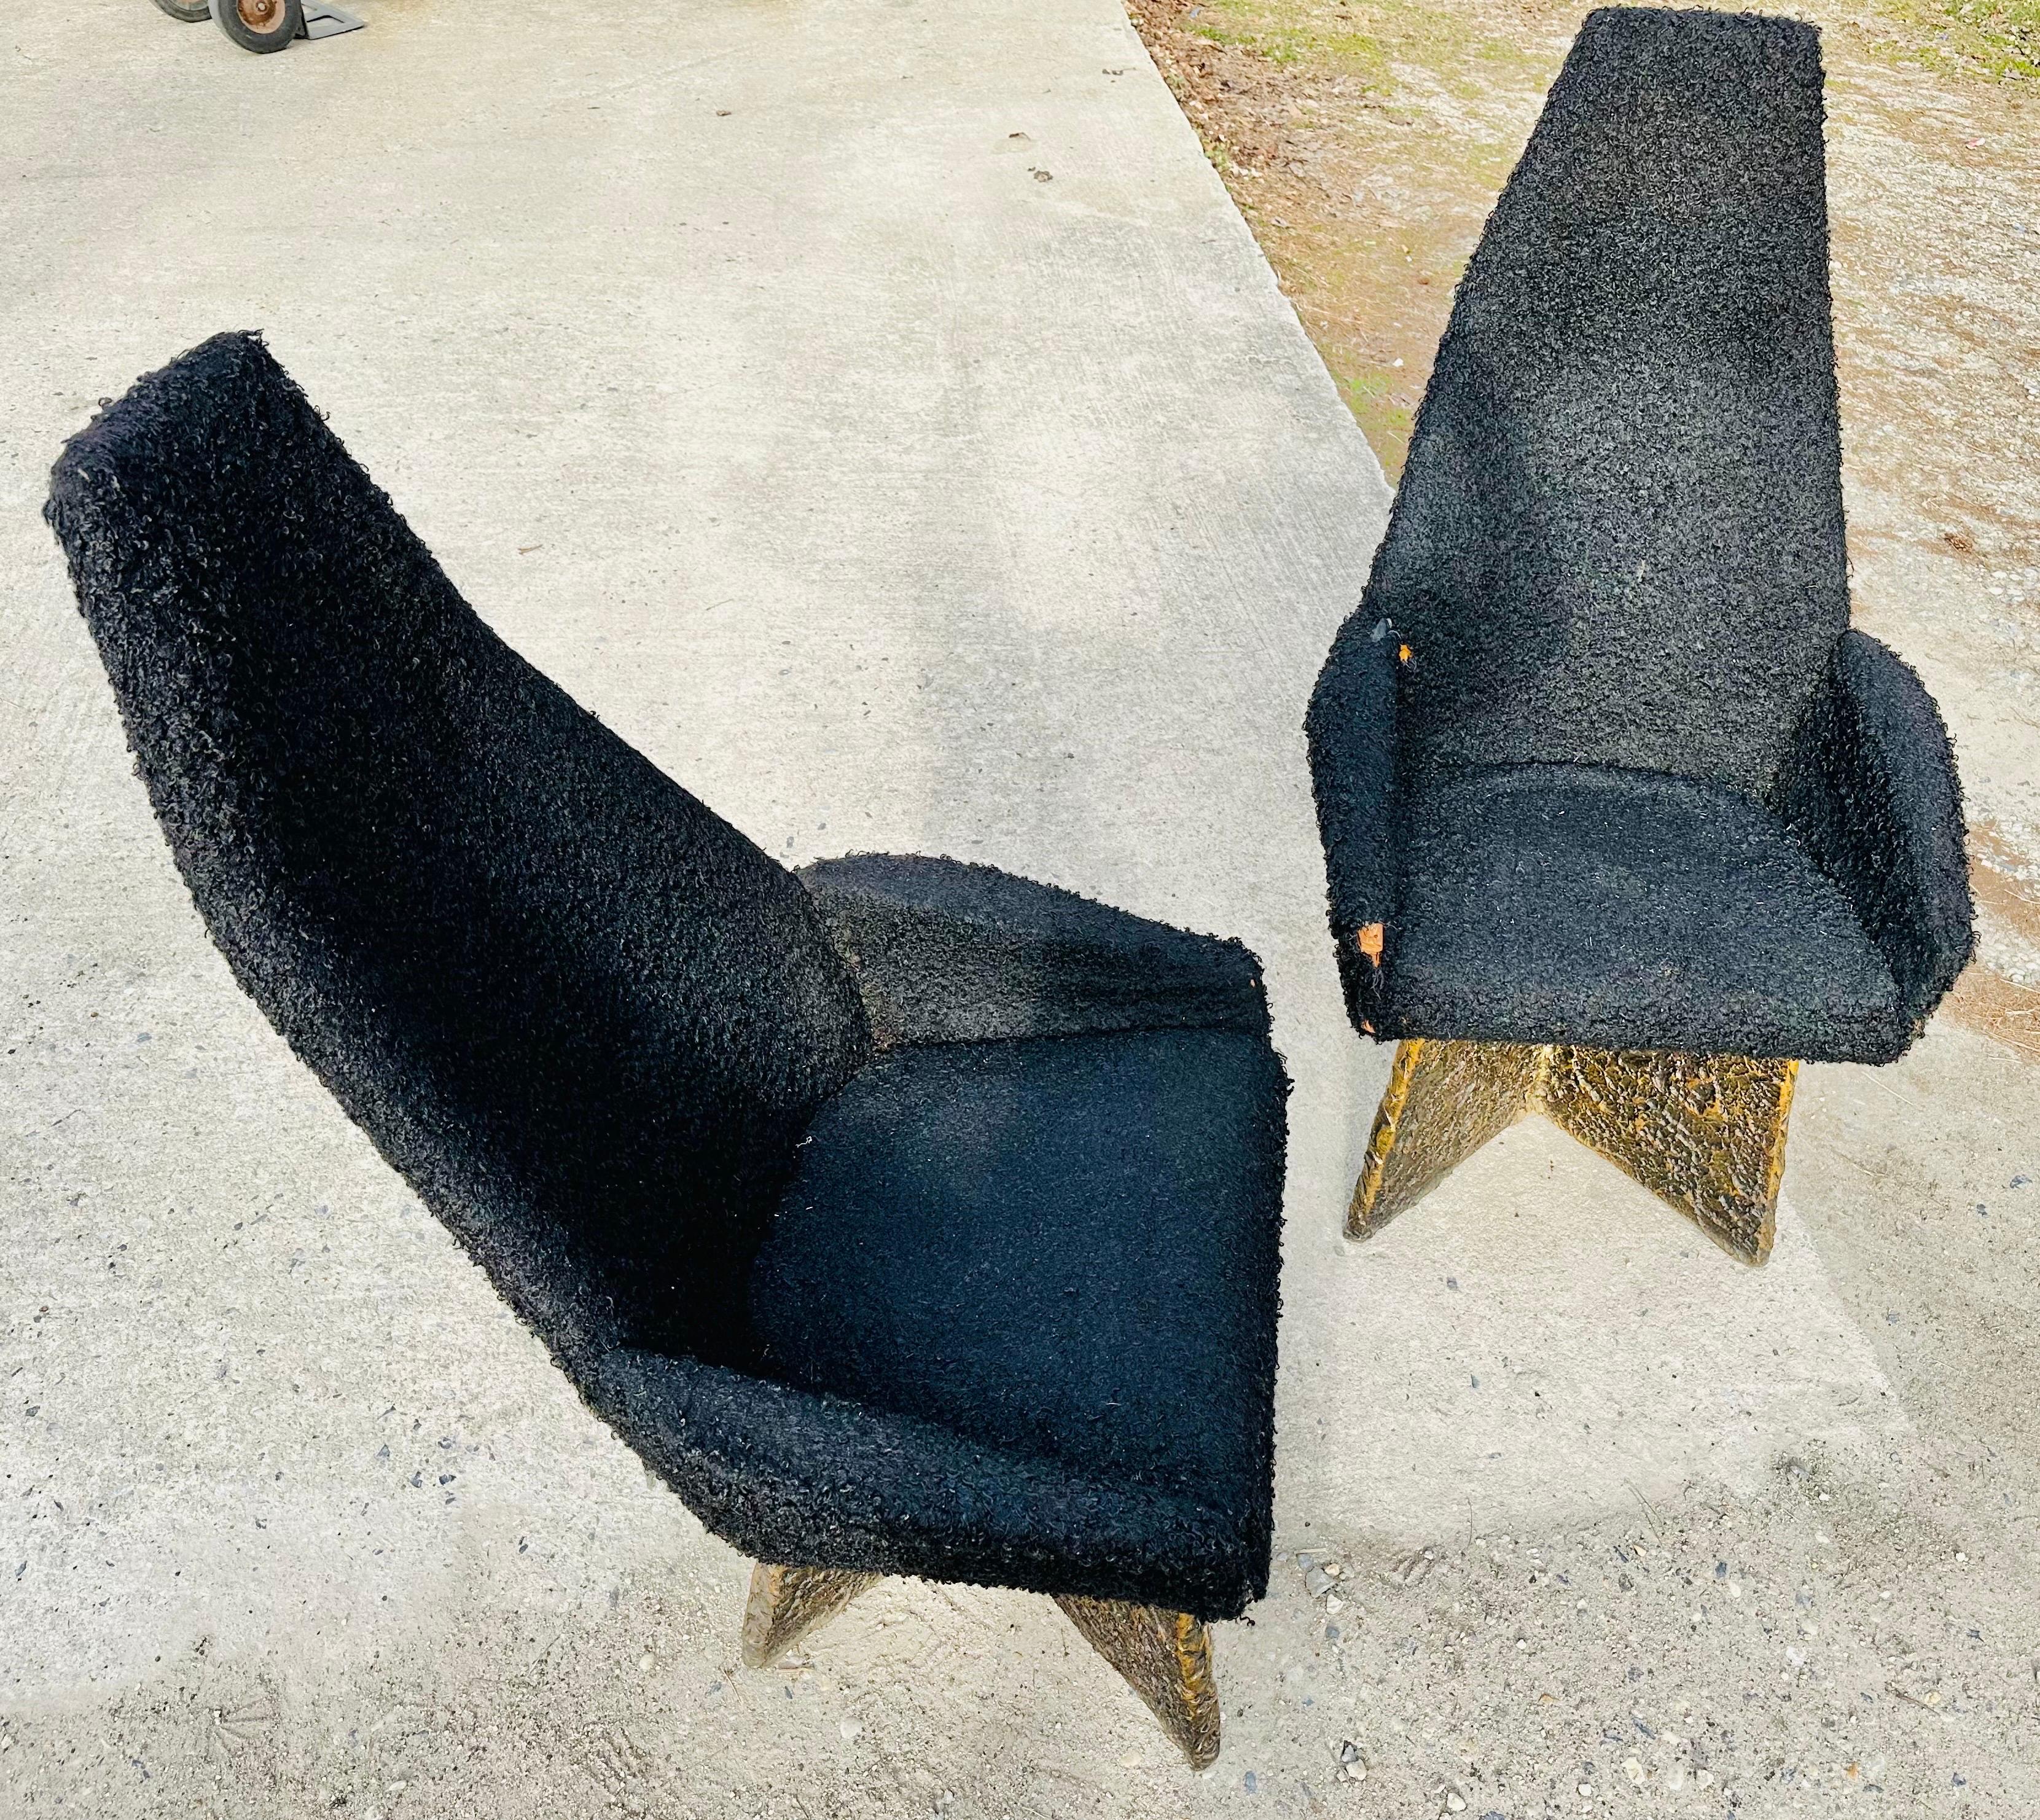 This listing is for a pair of Mid-Century Modern Adrian Pearsall Brutalist Arm Chairs. Featuring a high back design, brutalist base, and original fuzzy black upholstery. This is an exceptional example of Pearsall’s design.